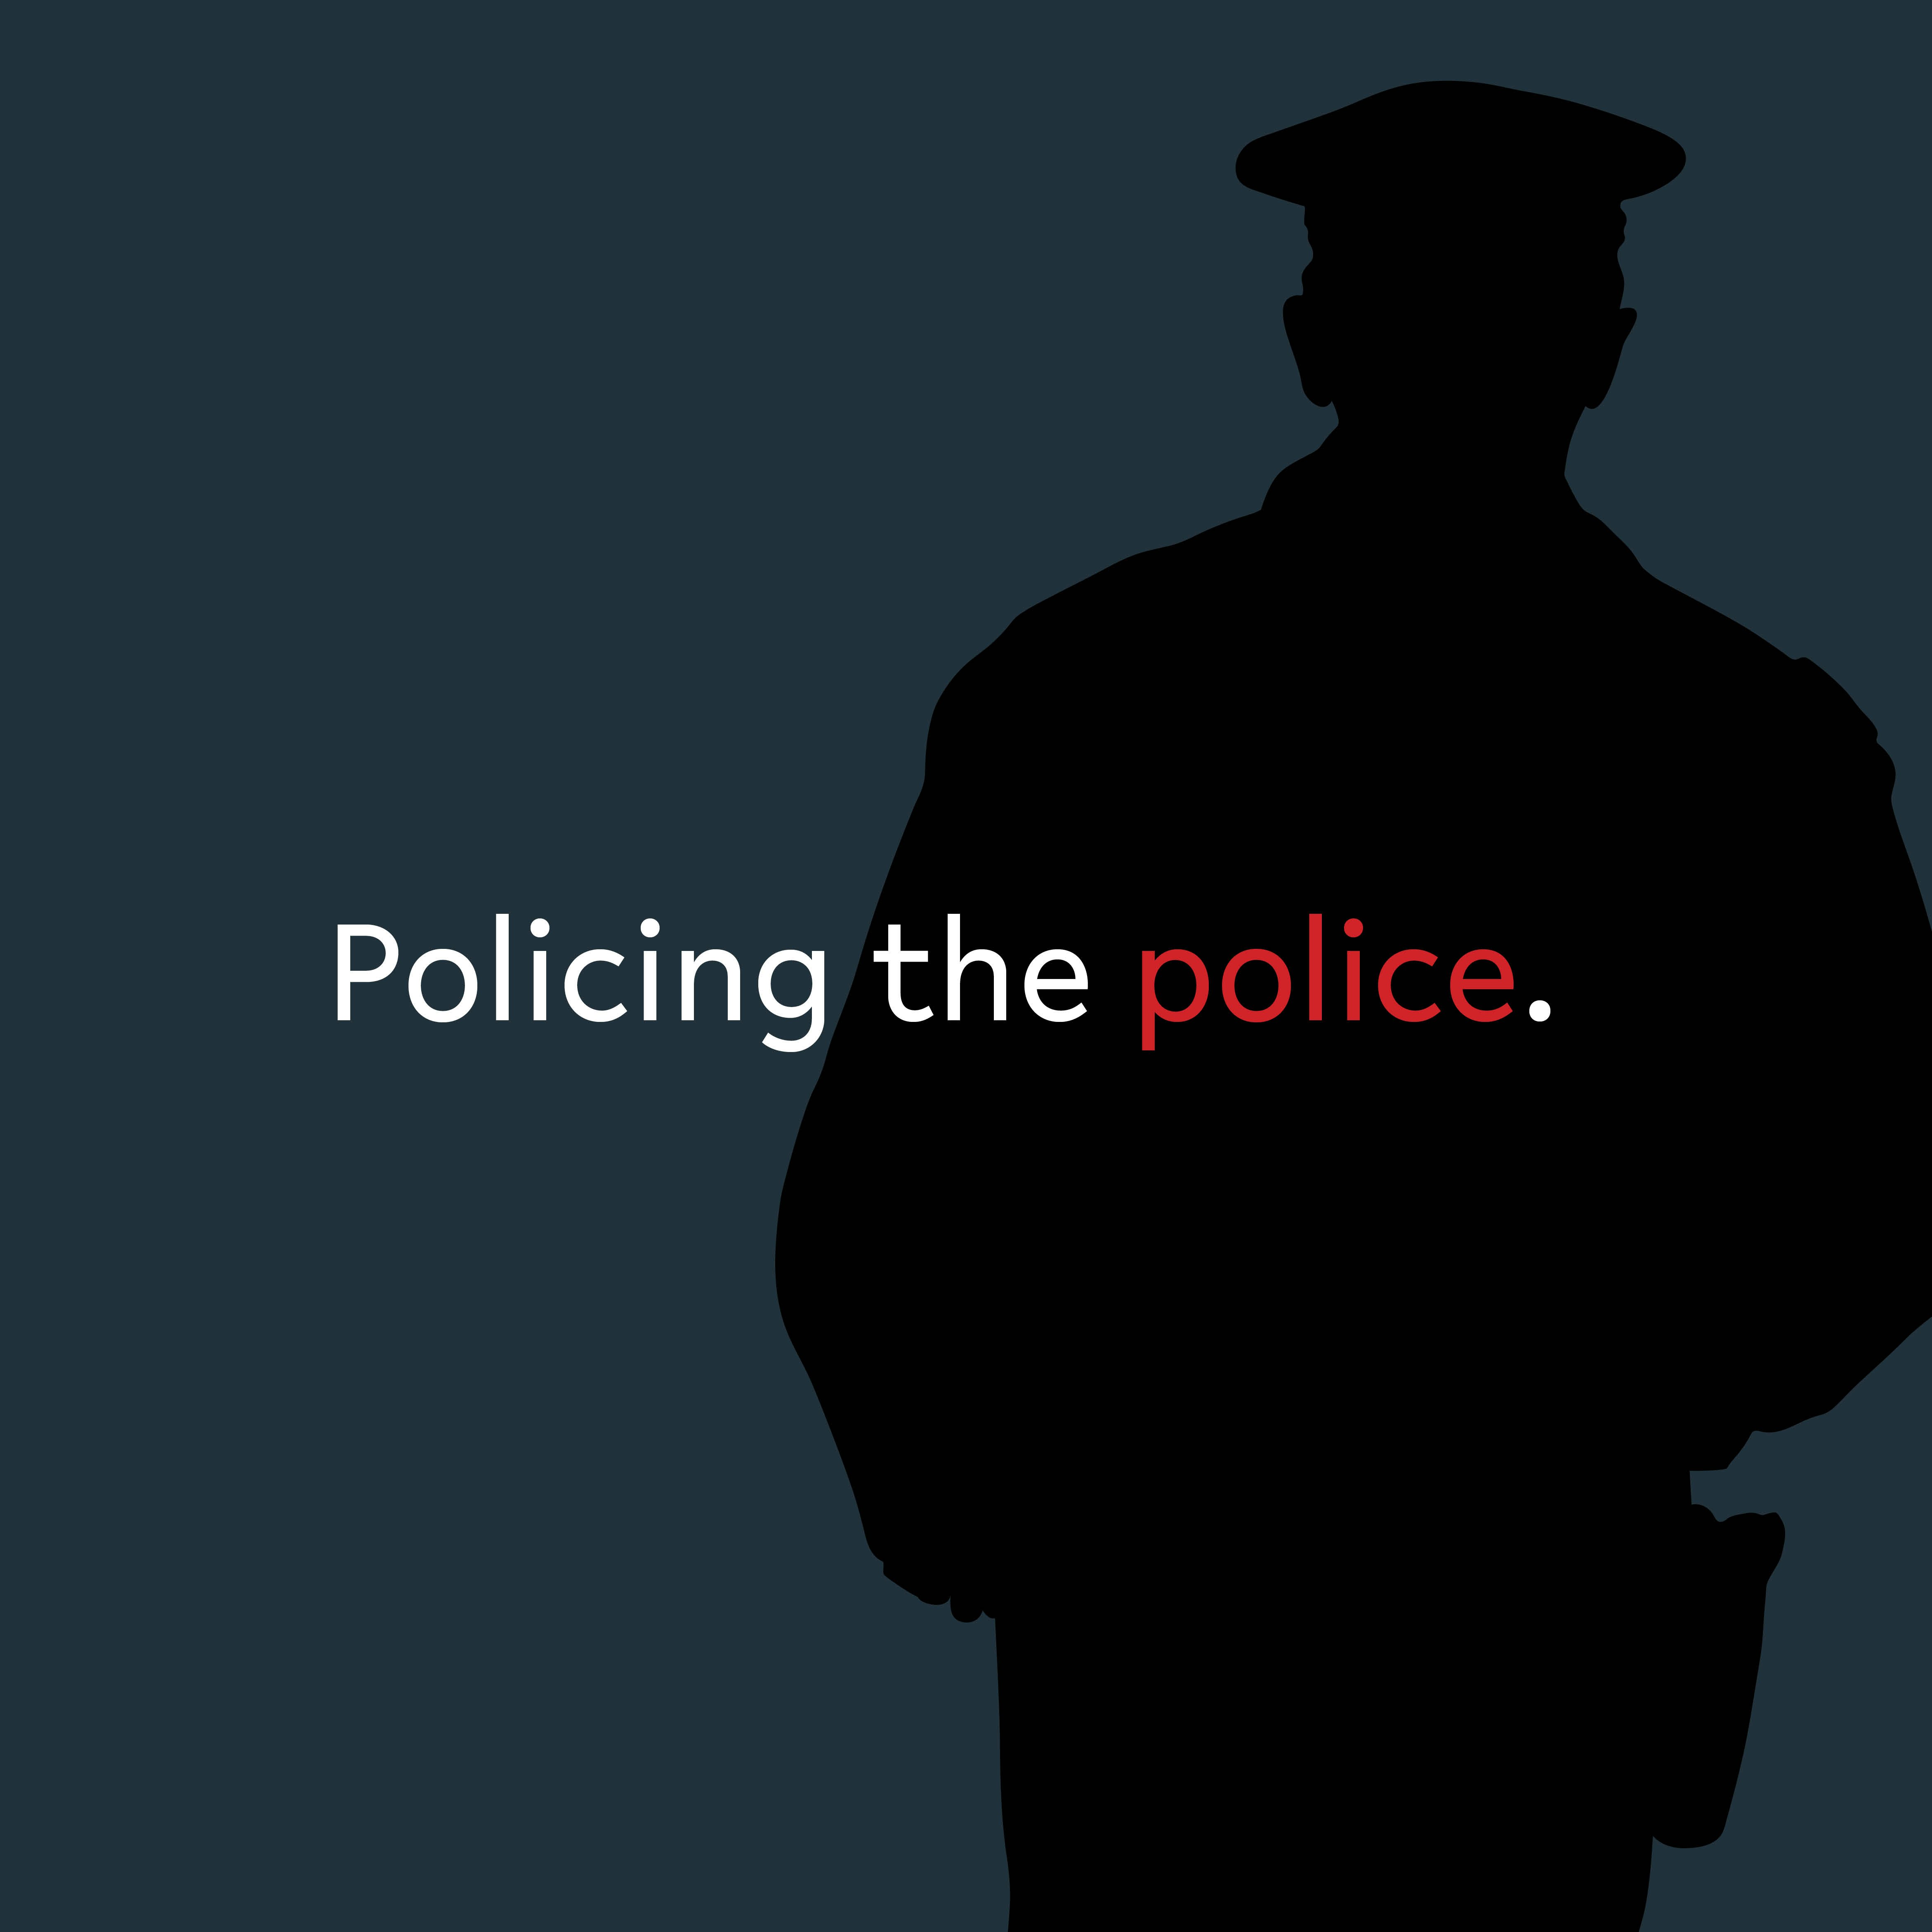 Who Is Policing the Police?